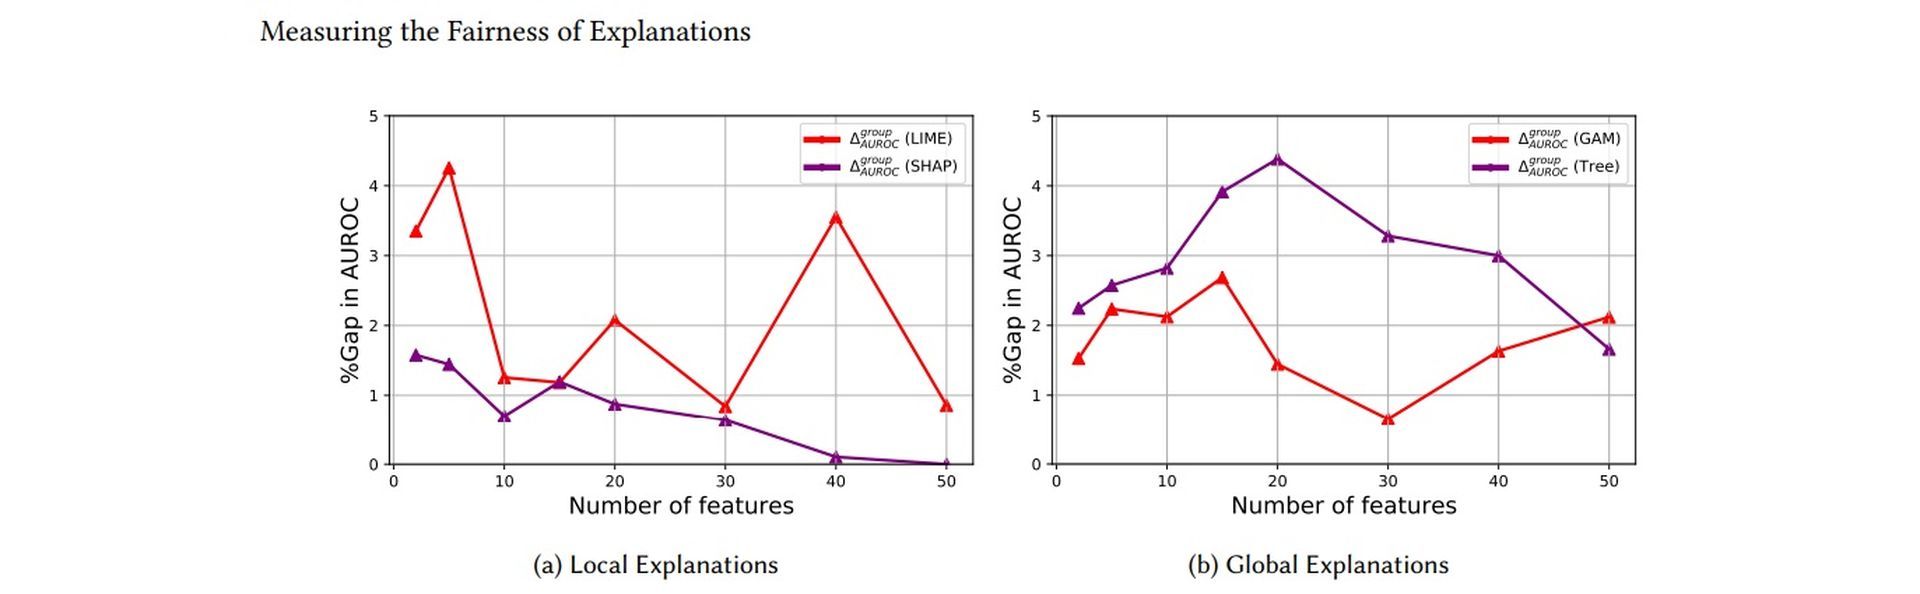 Explanation methods that mimic a larger model by generating simple approximations of machine learning predictions are sometimes used by researchers.